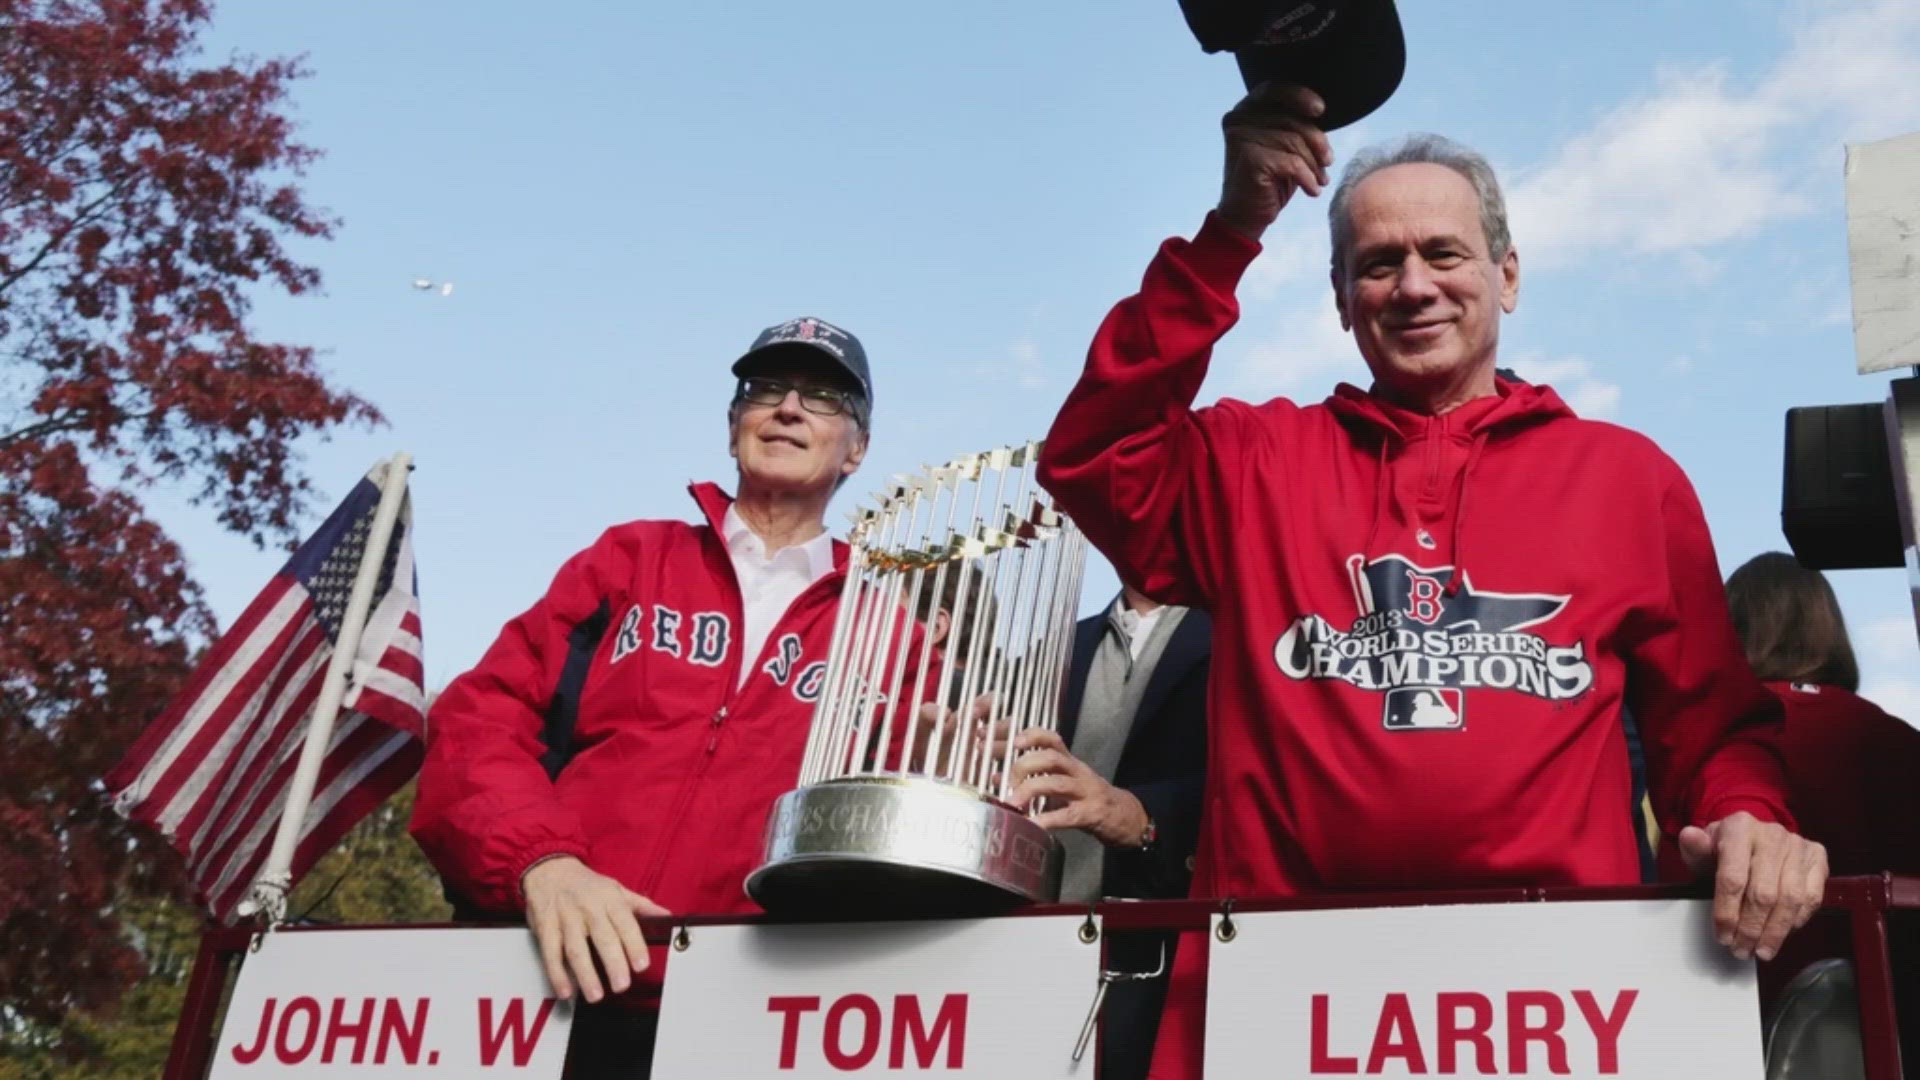 Lucchino was the top Red Sox executive as the team won three World Series titles starting in 2004, ending an 86-year drought.